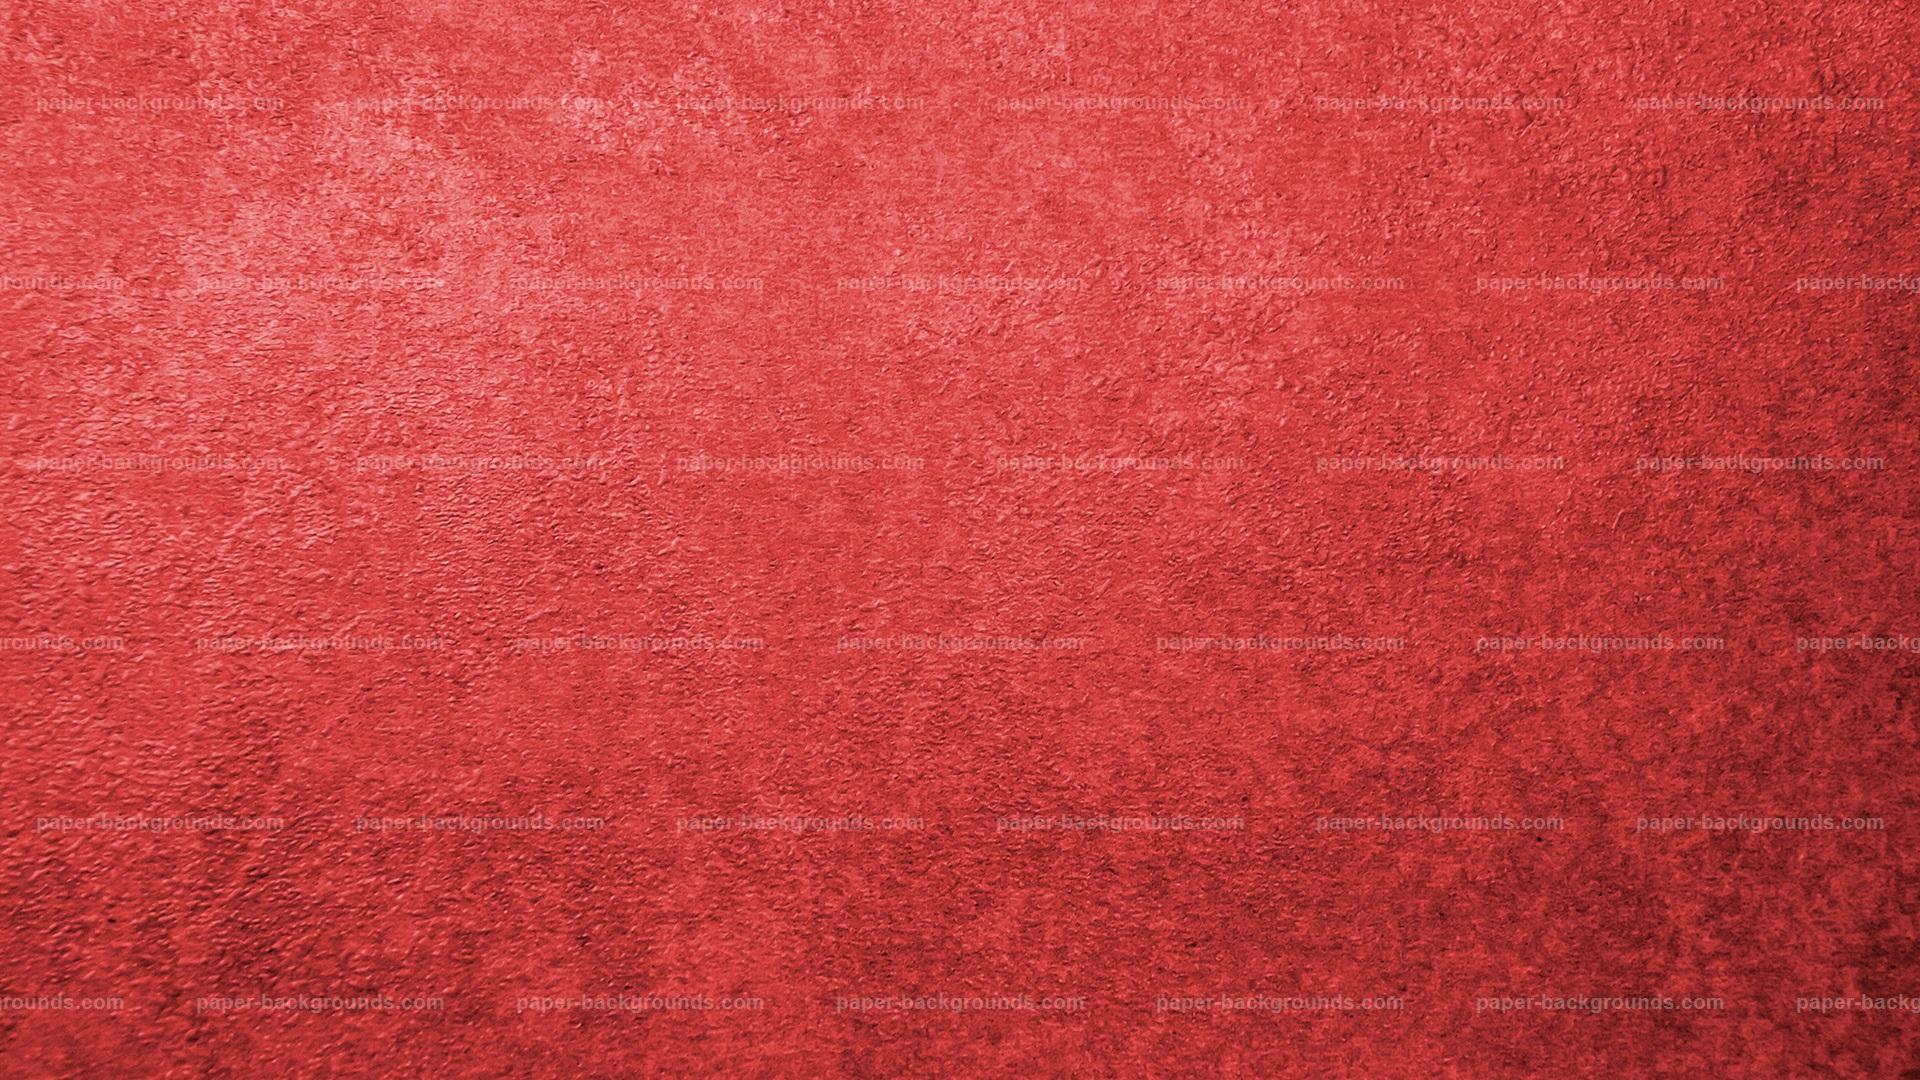 Red Paper Wallpapers